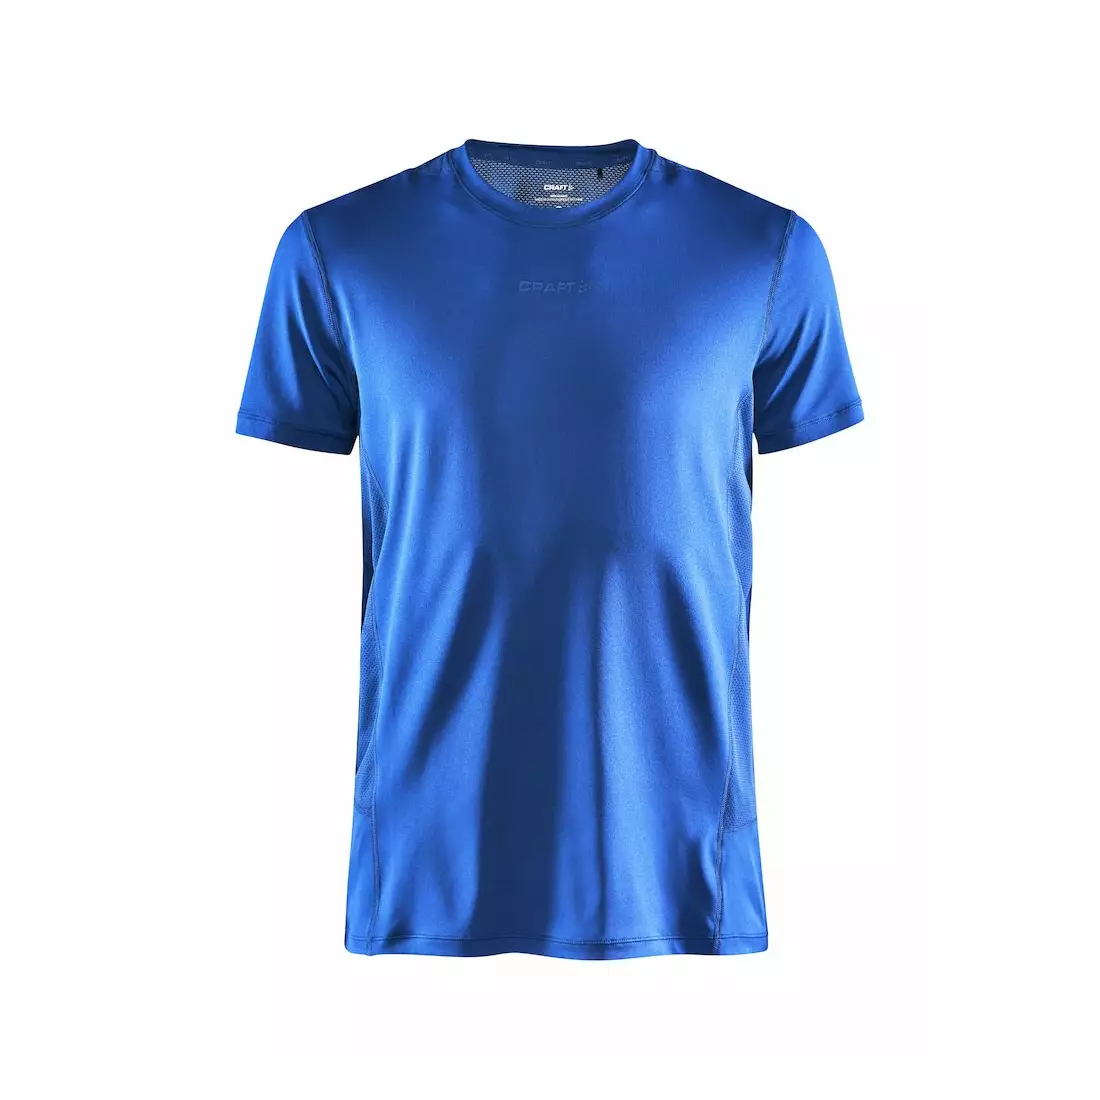 CRAFT ADV ESSENCE SS TEE M - men's sports shirt with short sleeves blue 1908753-360000